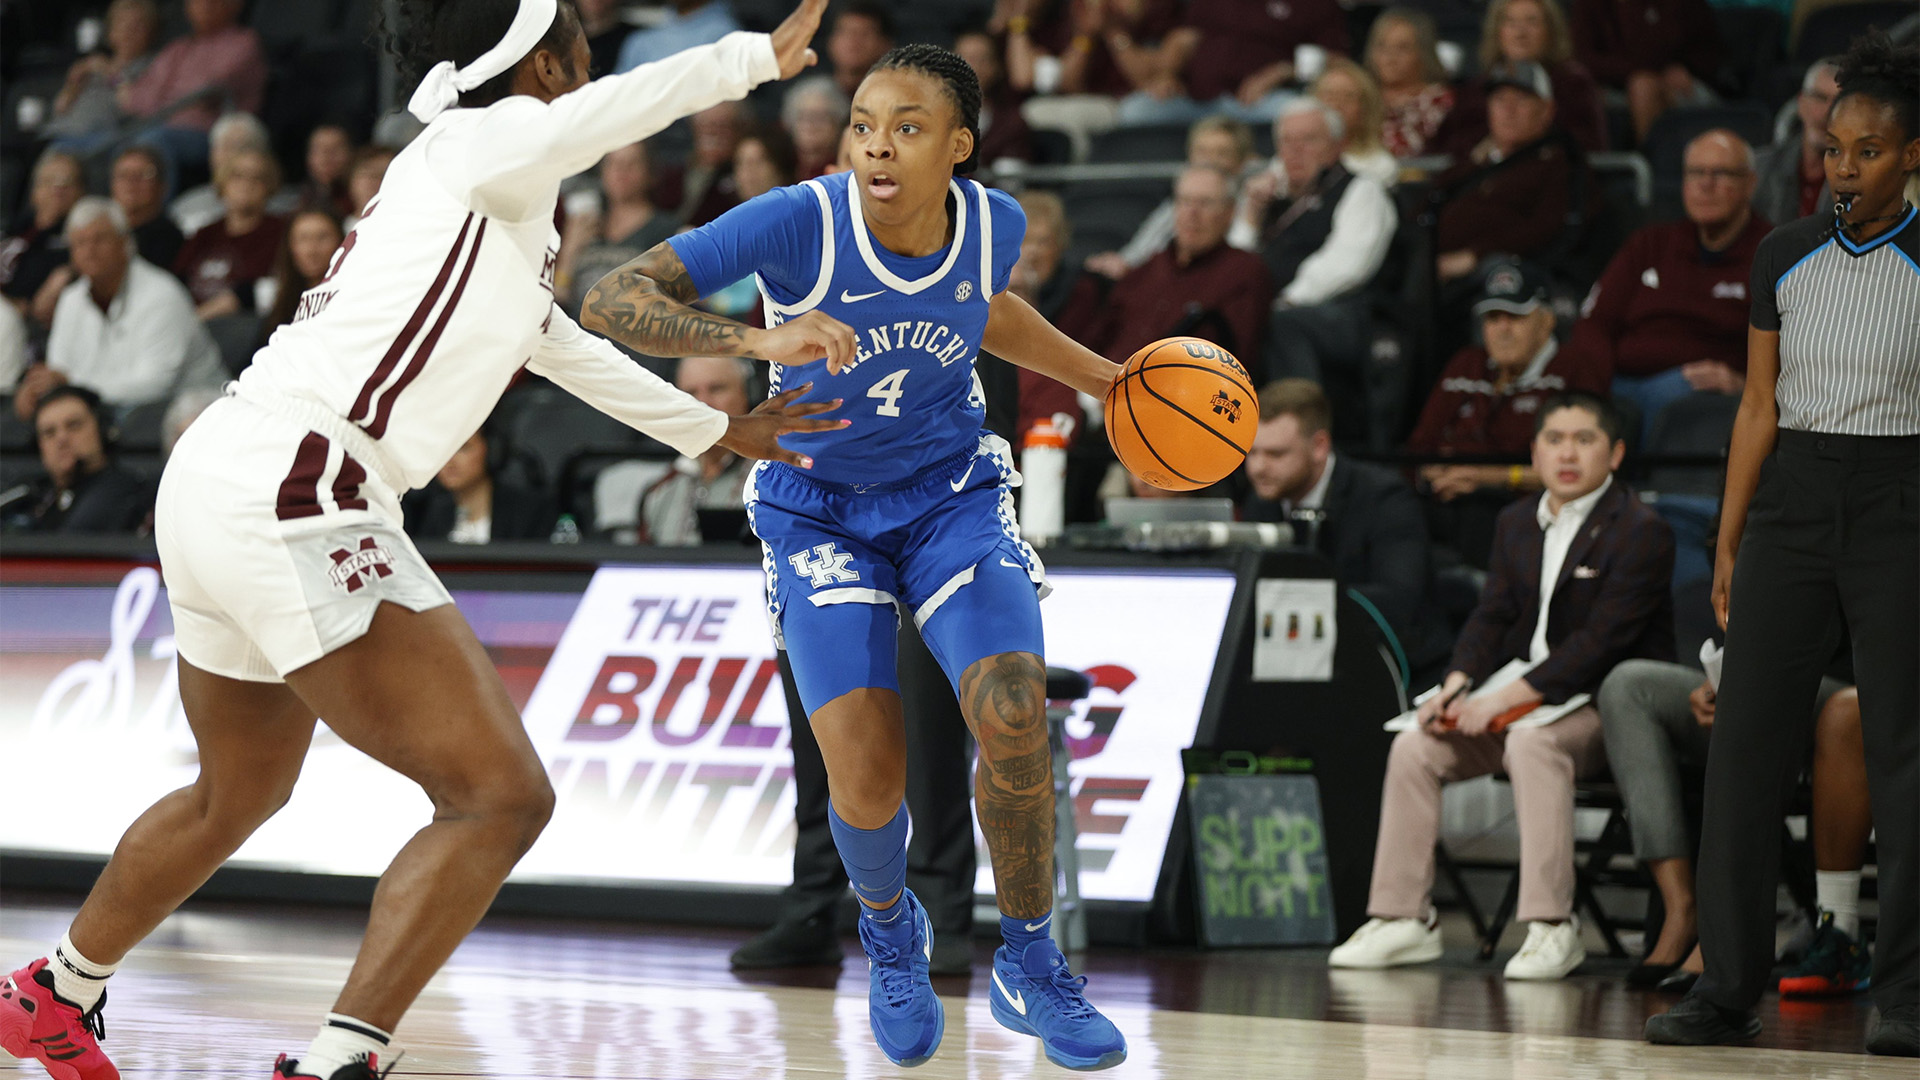 Kentucky-Mississippi State Women's Basketball Postgame Notes